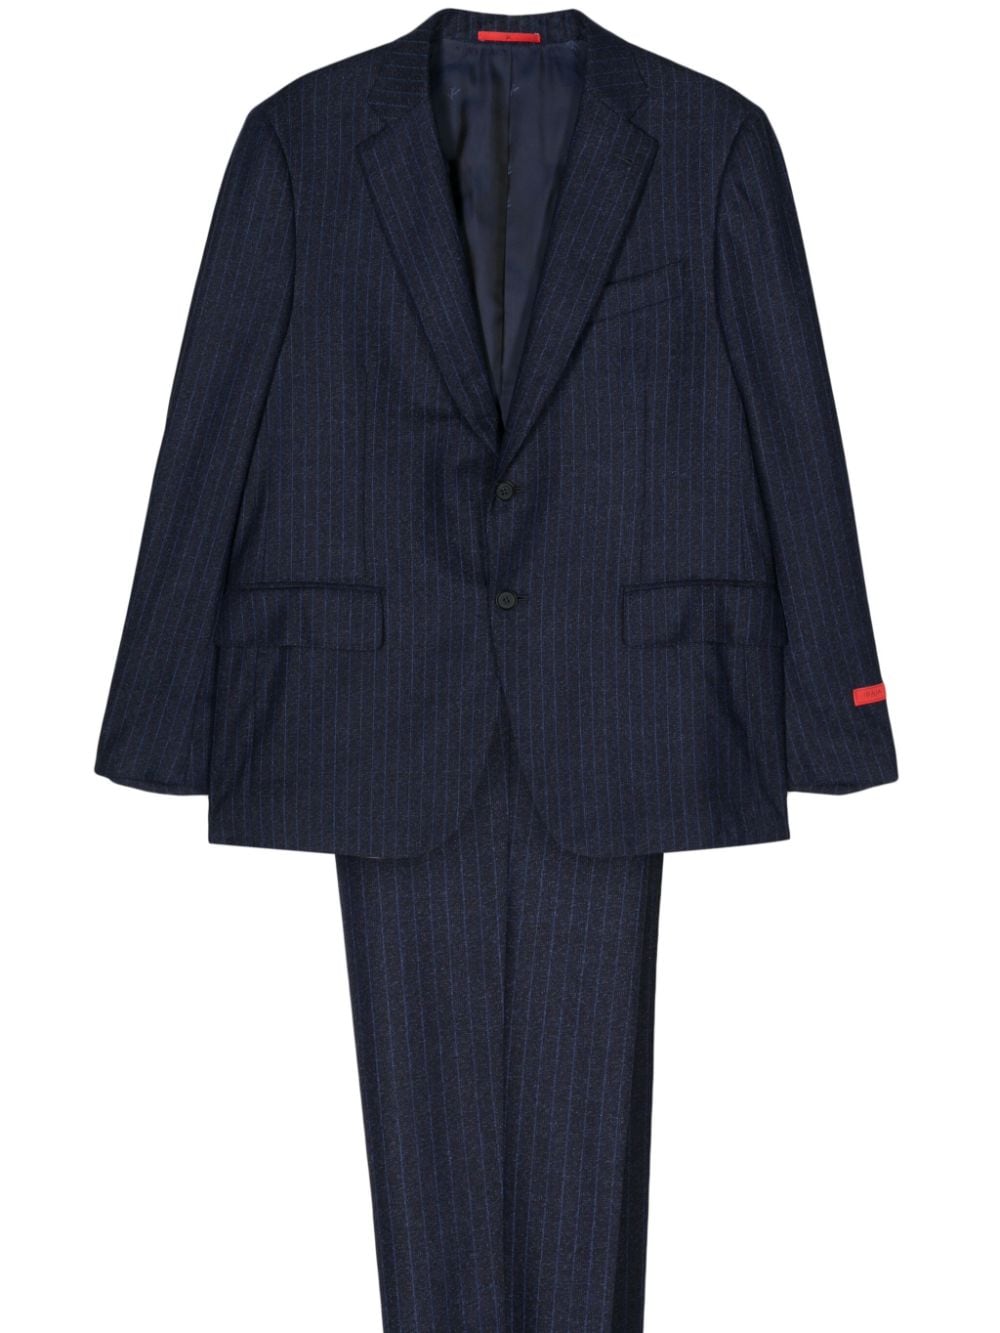 Image 1 of Isaia single-breasted suit